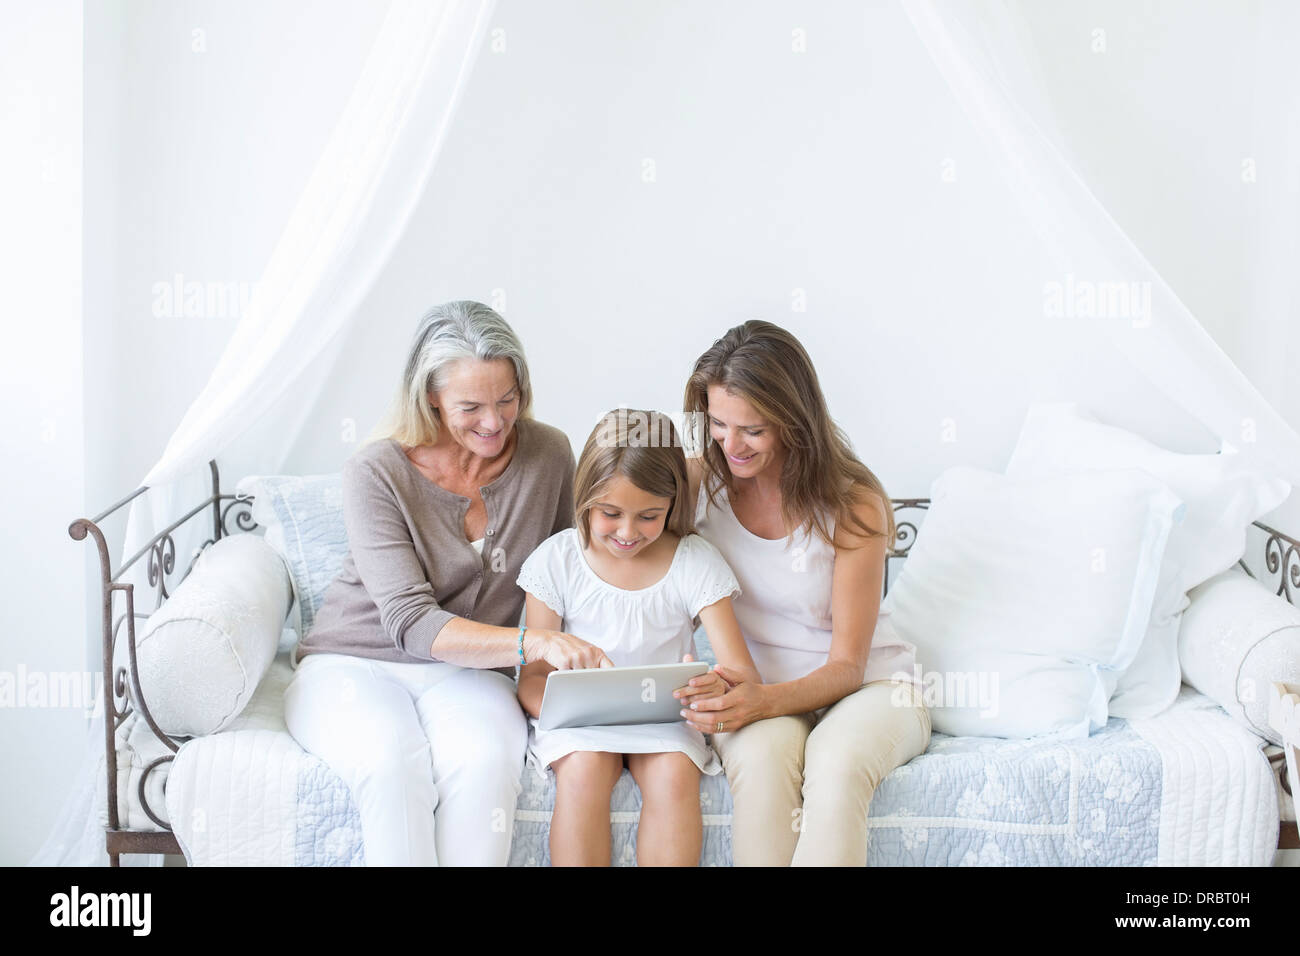 Multi-generation women using digital tablet on daybed Stock Photo